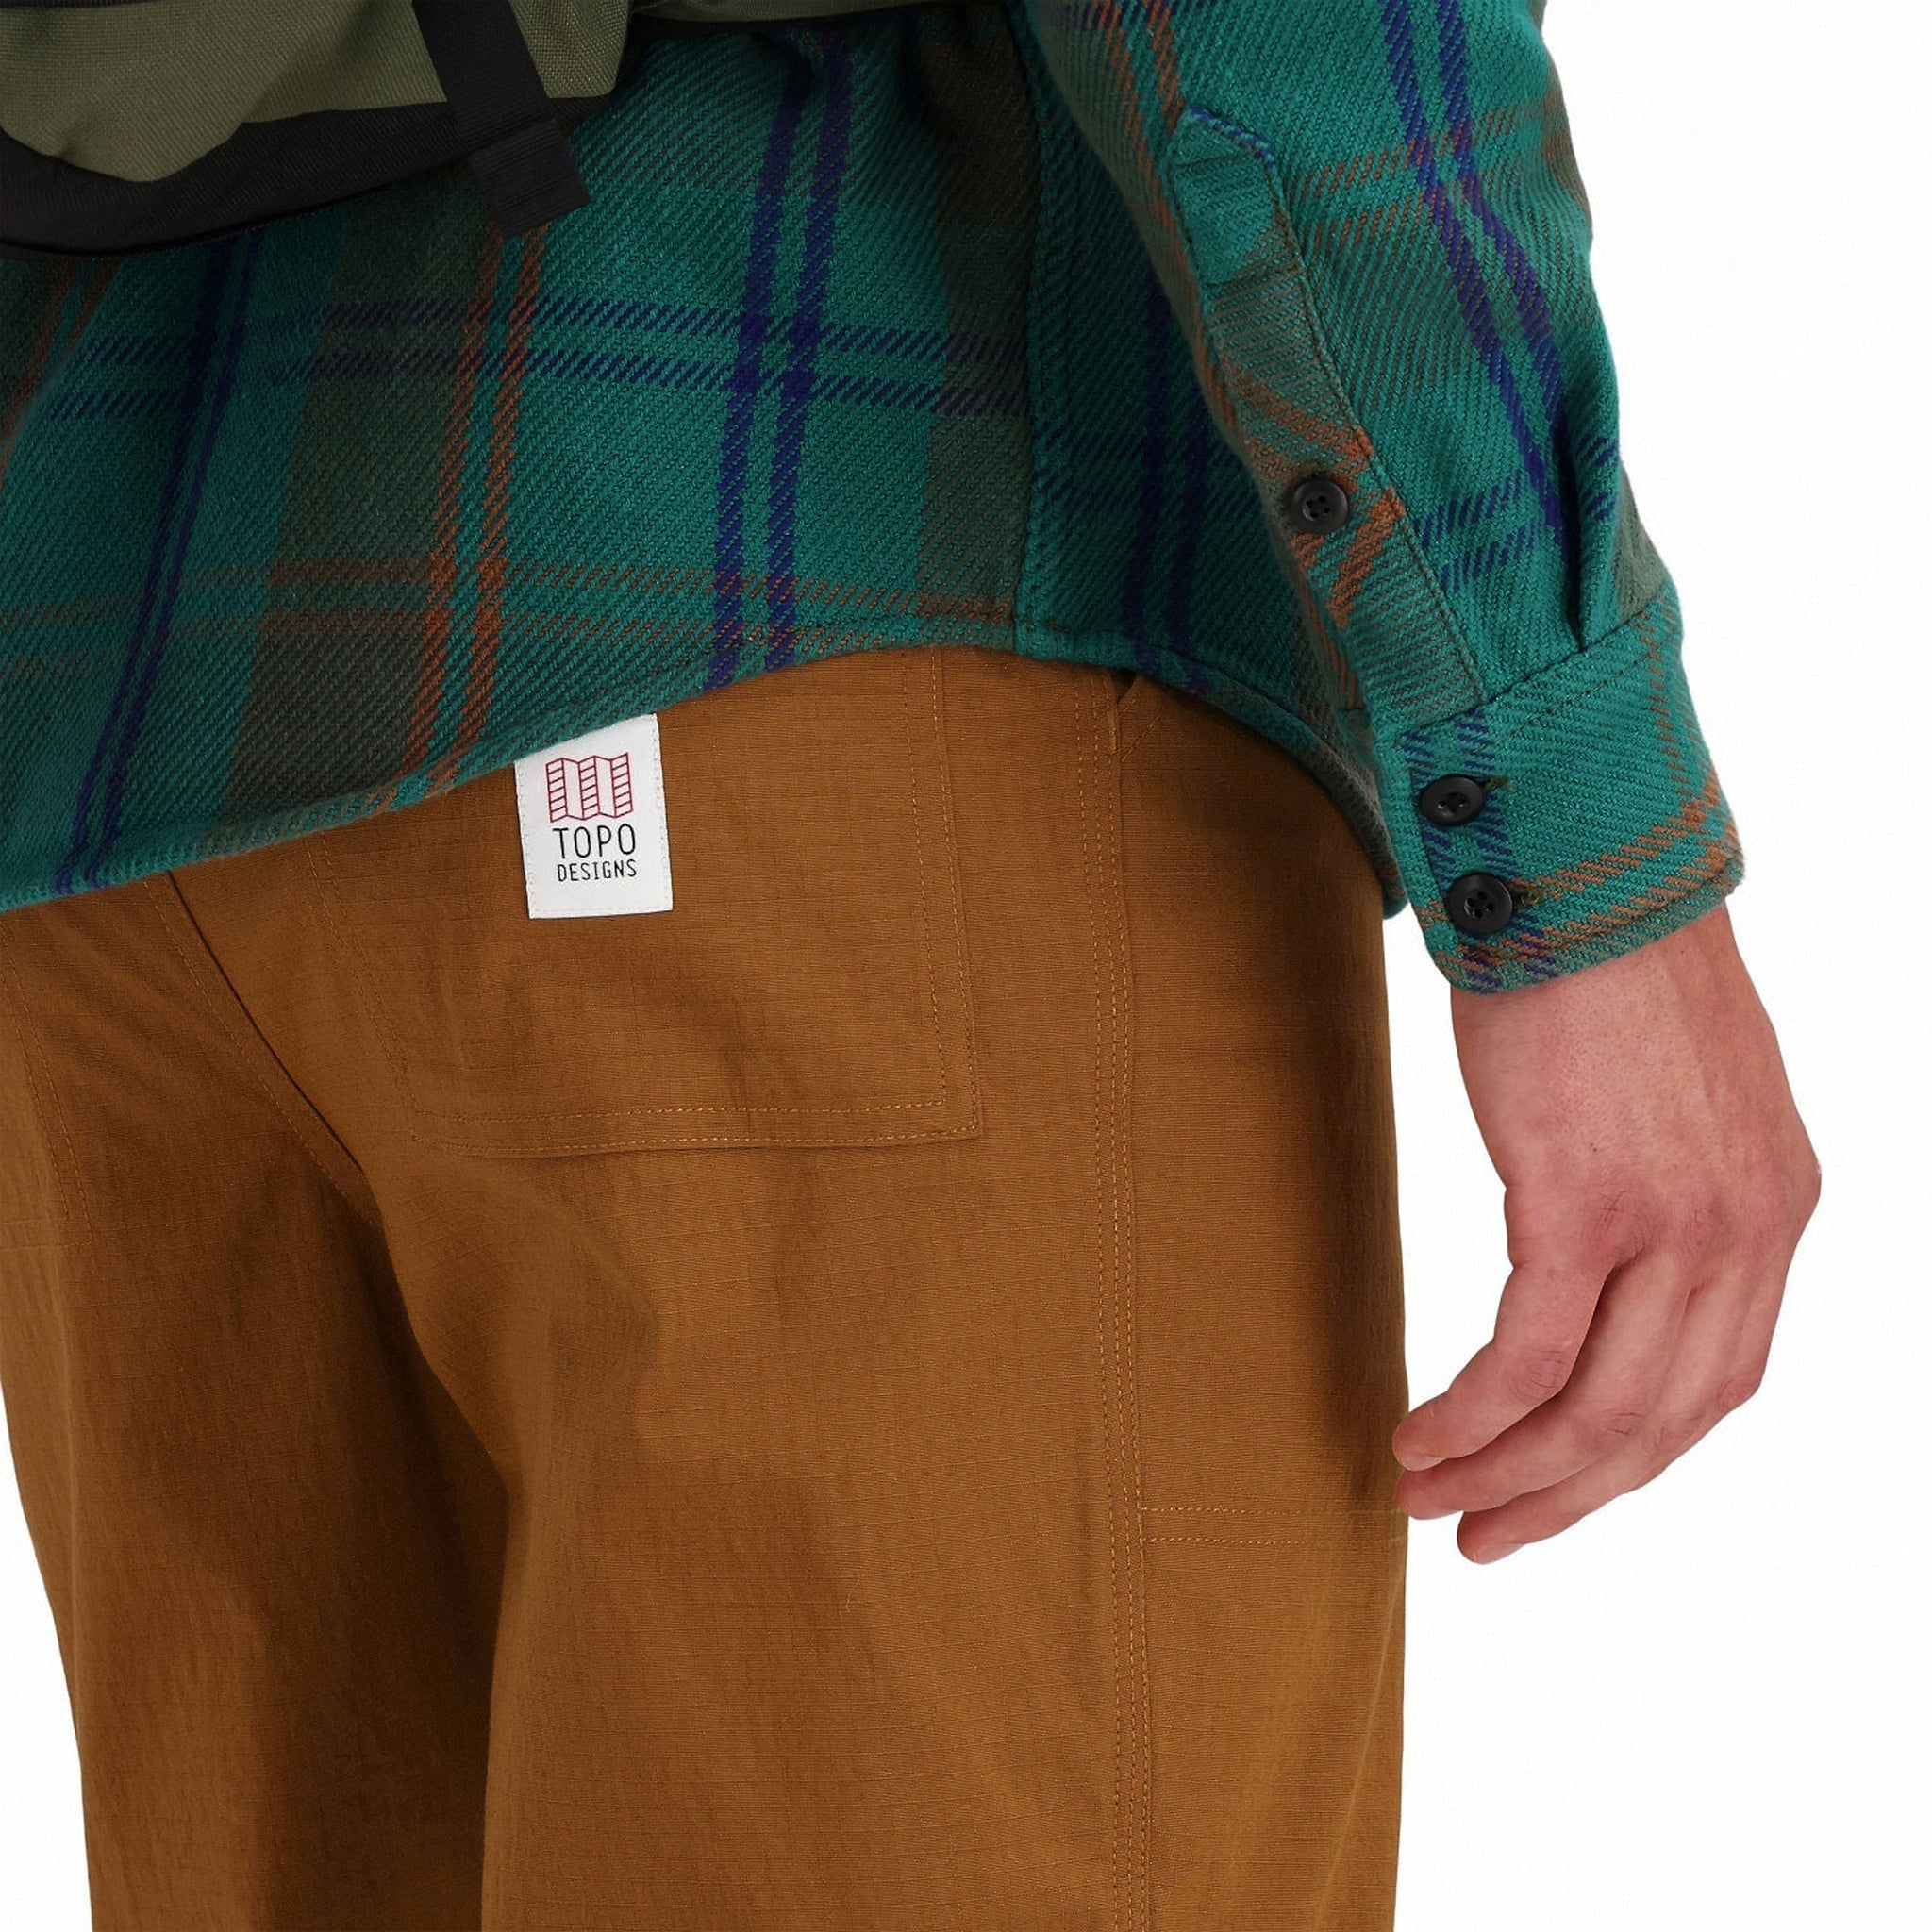 Back detail shot of sleeve cuff buttons on Topo Designs Men's Mountain Shirt Heavyweight "Green / Earth Plaid" brown blue button-up.